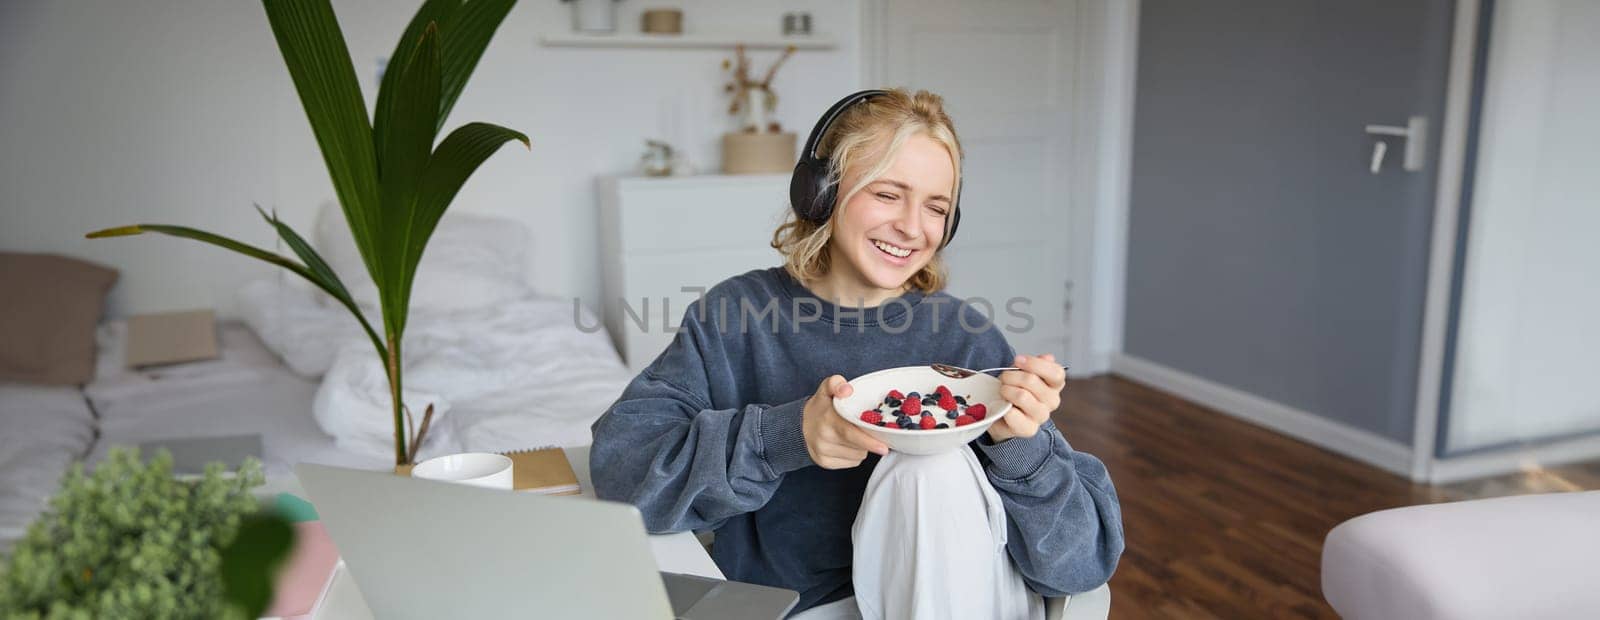 Image of happy woman sitting in a room, watching interesting tv show or movie on laptop, using screaming service, wearing headphones, eating dessert and drinking tea.